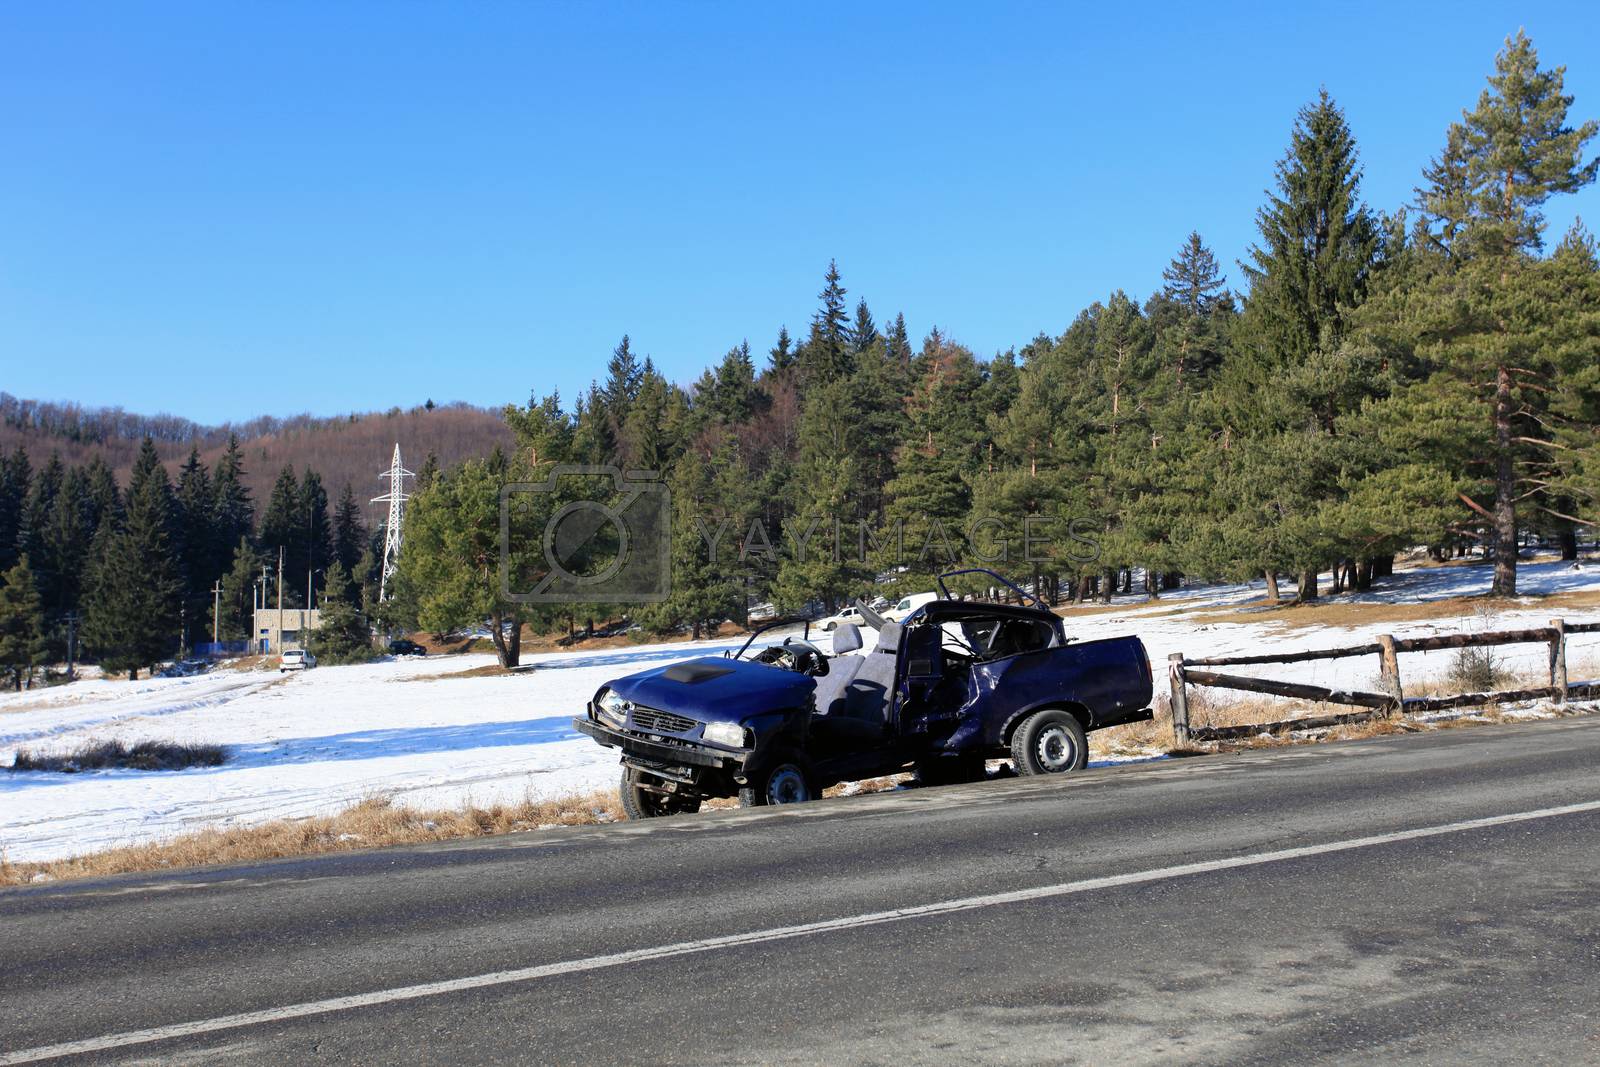 Royalty free image of Front of blue car damaged by crash accident on side of the road by PixAchi